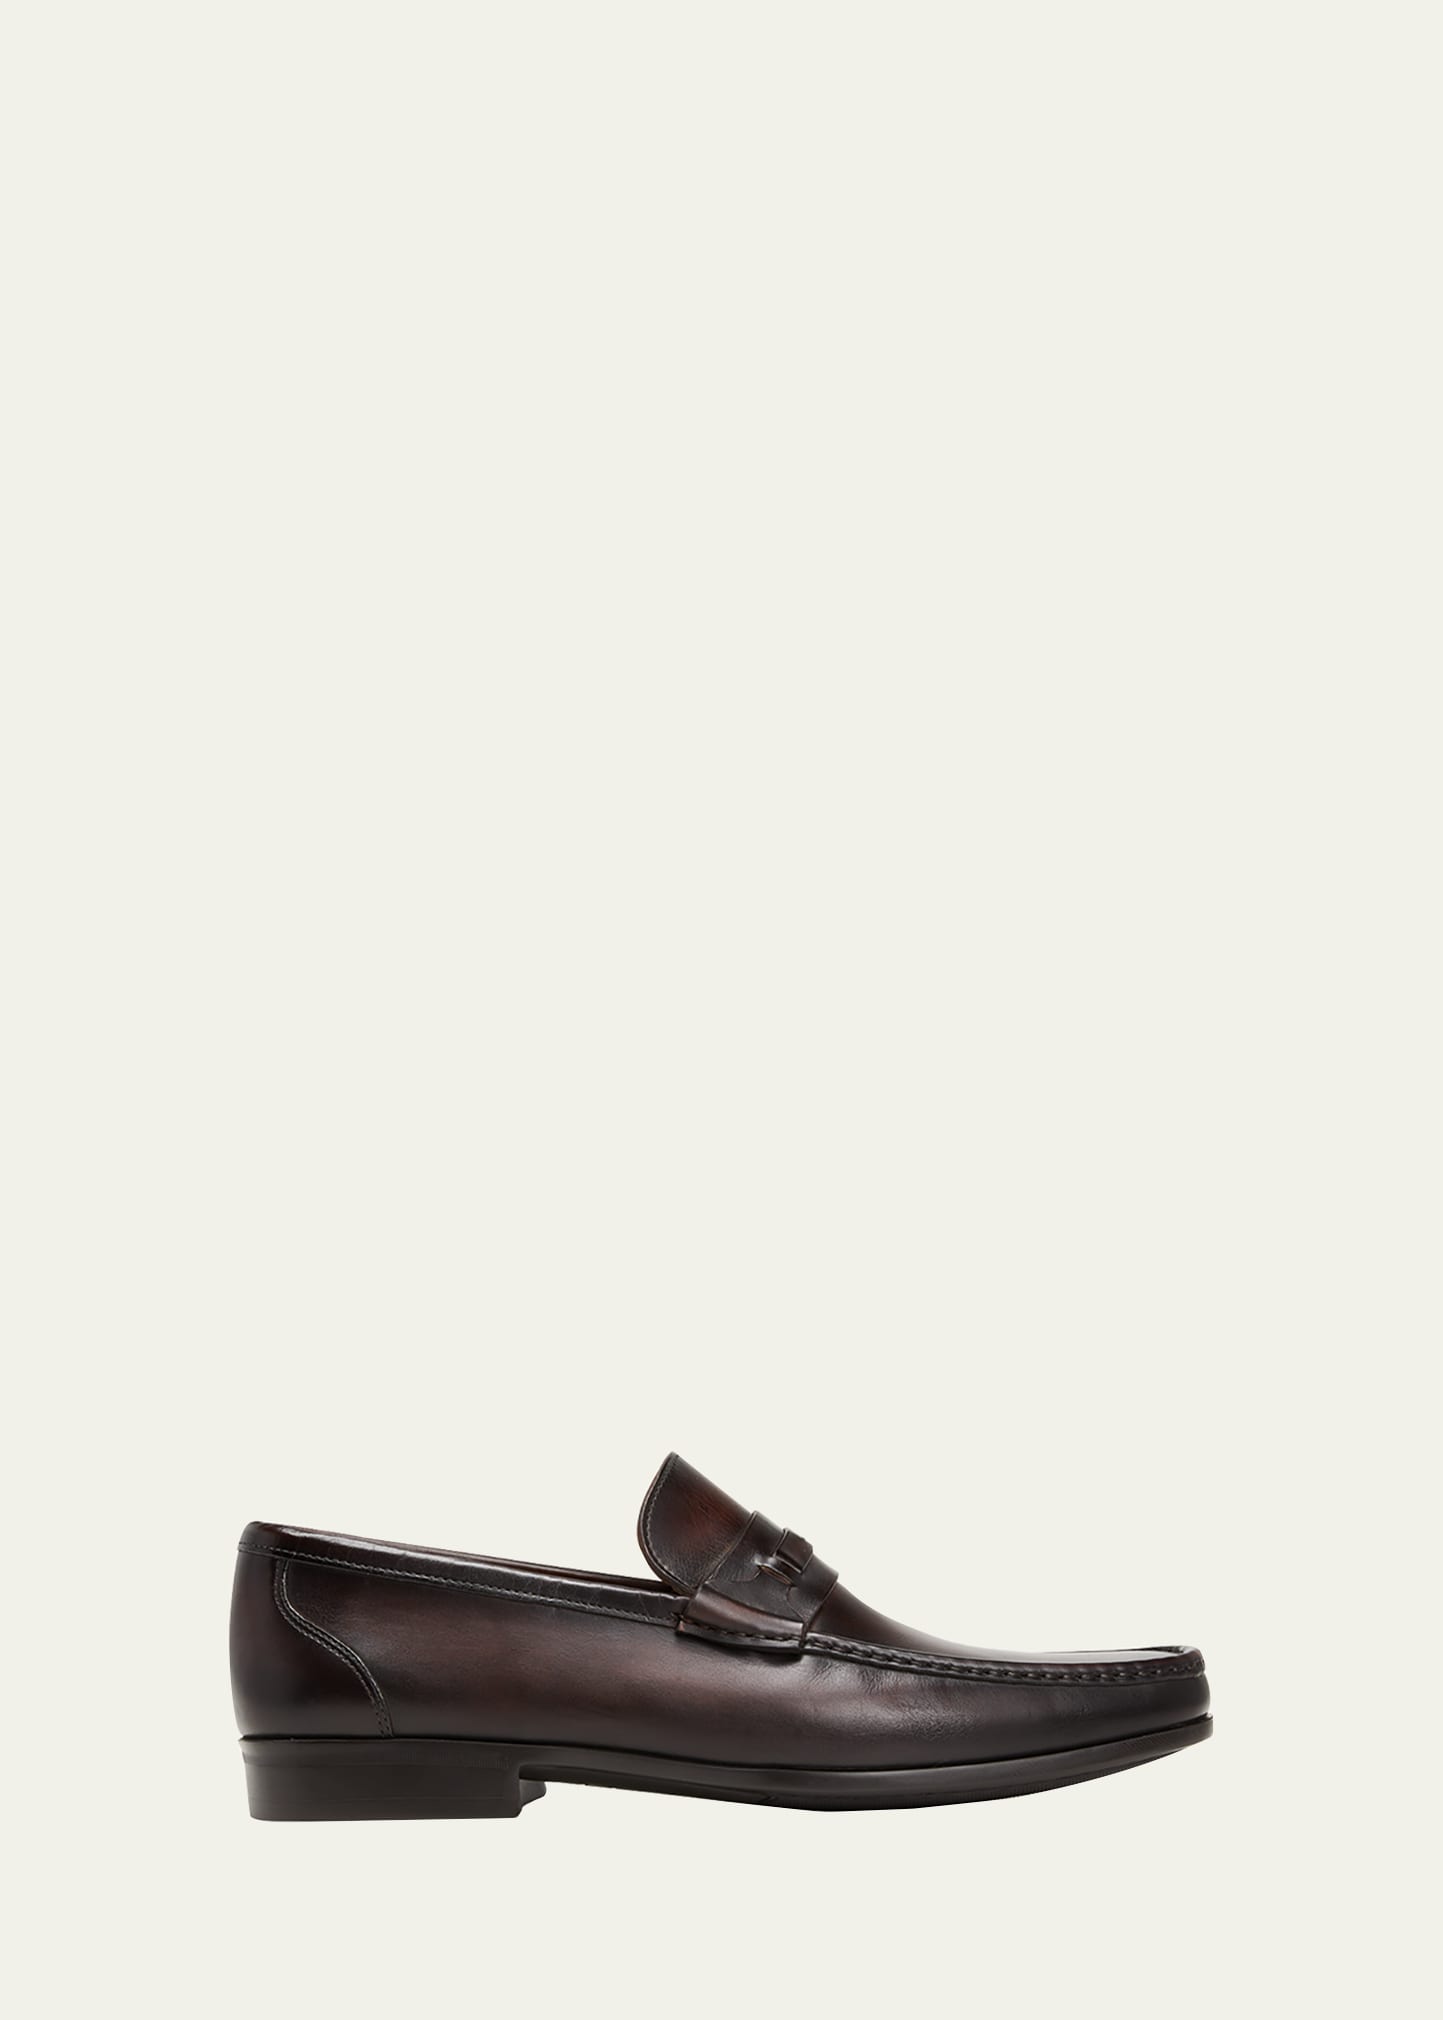 MAGNANNI MEN'S LEATHER MOCCASIN LOAFERS